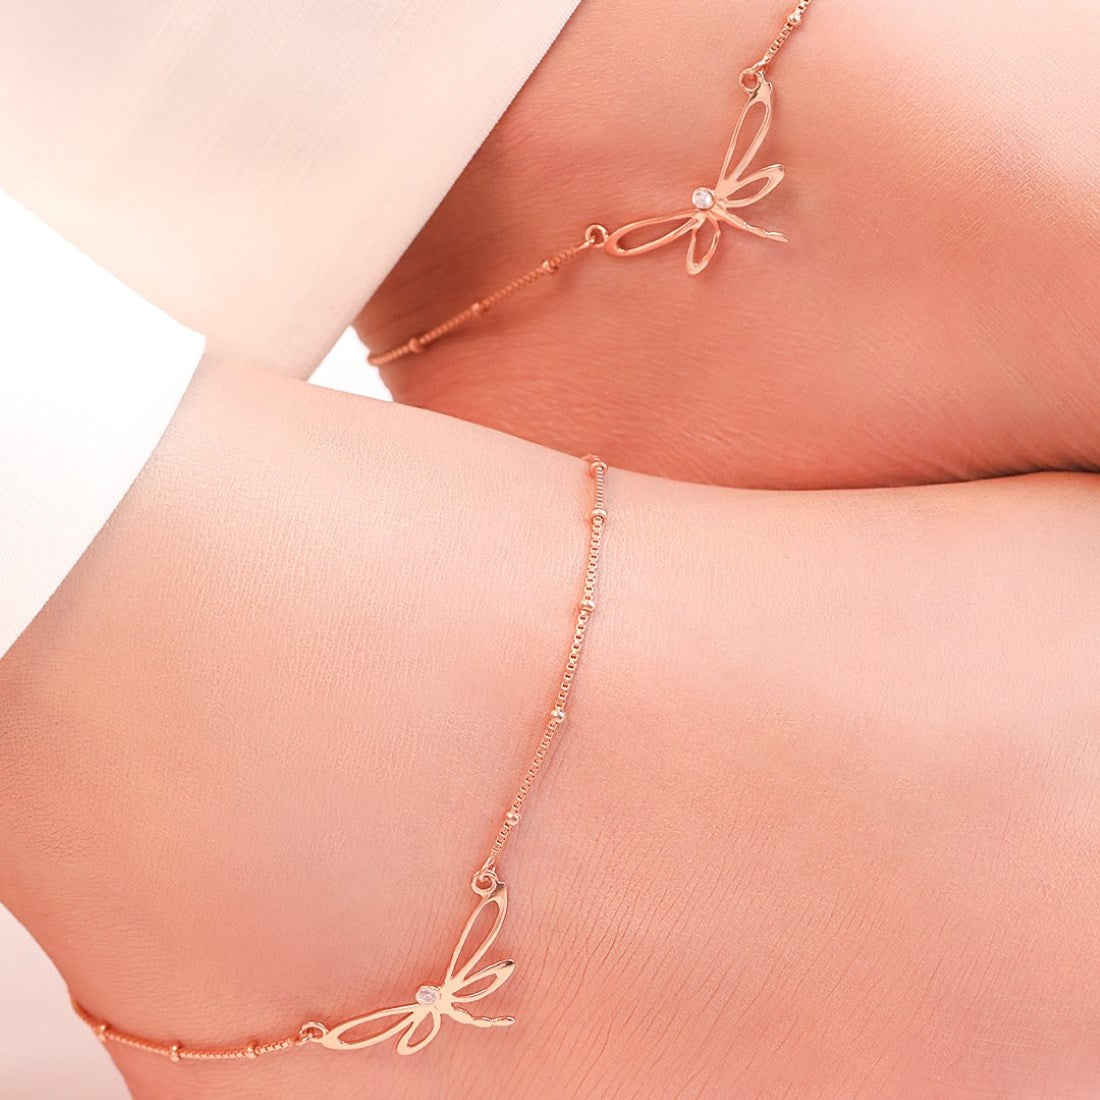 Dragonfly Rose Gold Plated 925 Sterling Silver Chain Anklet with Beads